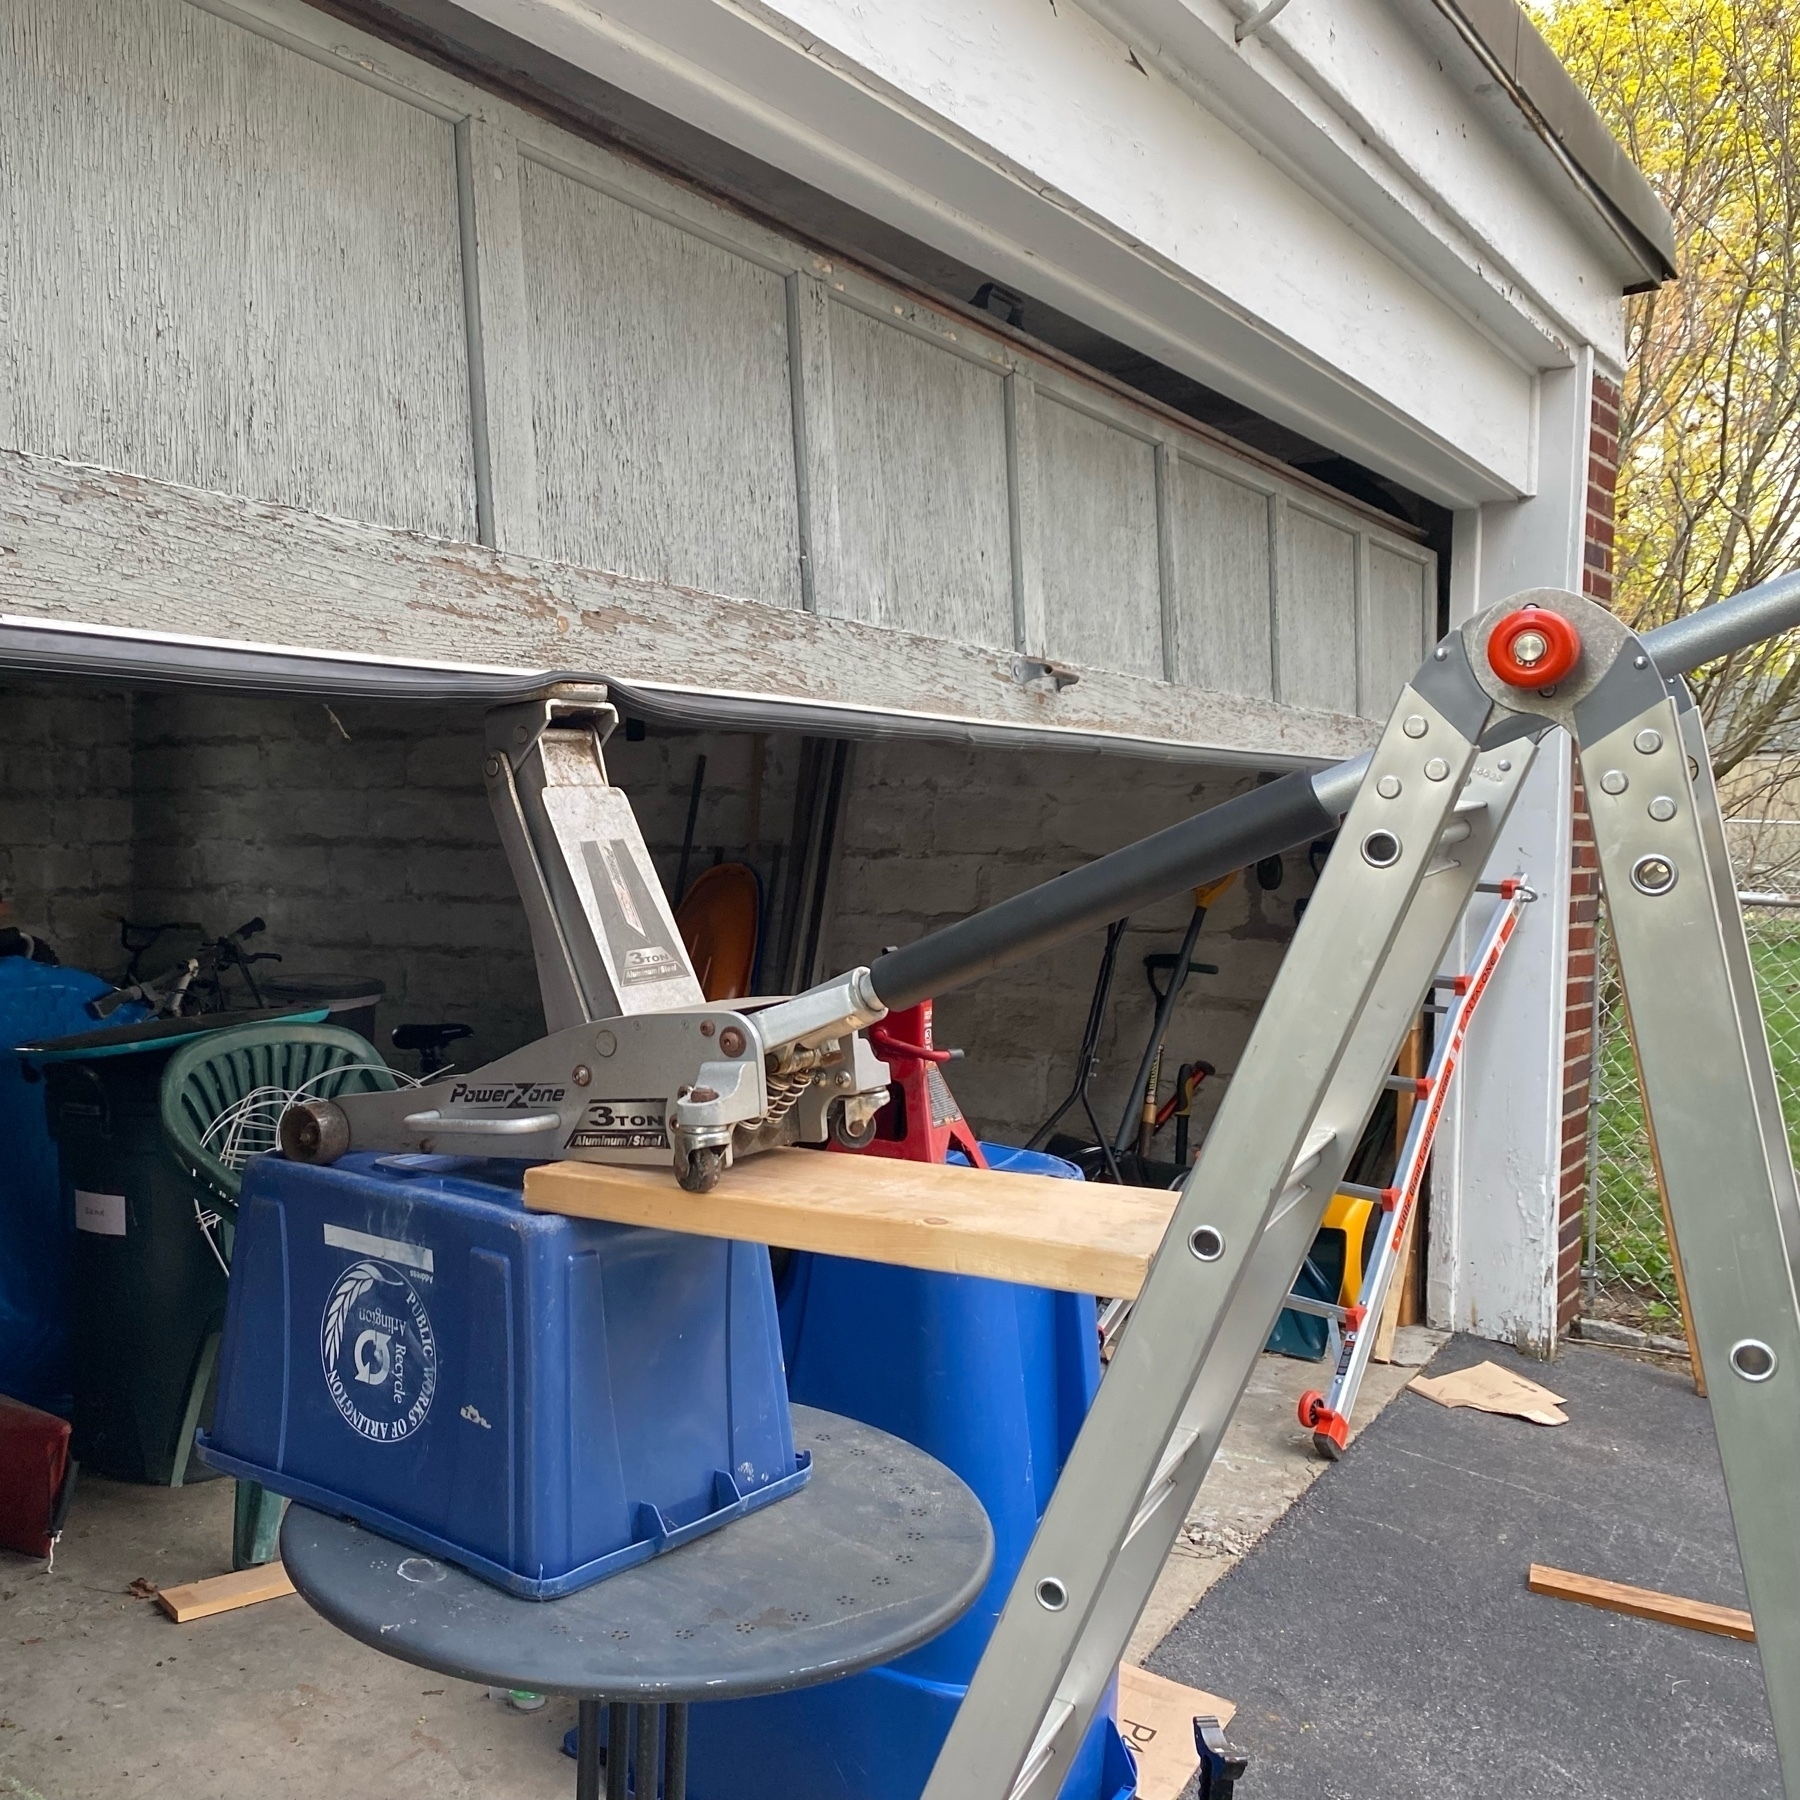 pictue of a garage door being held open by a contrived combination of table, recyling bin, and automotive floor jack